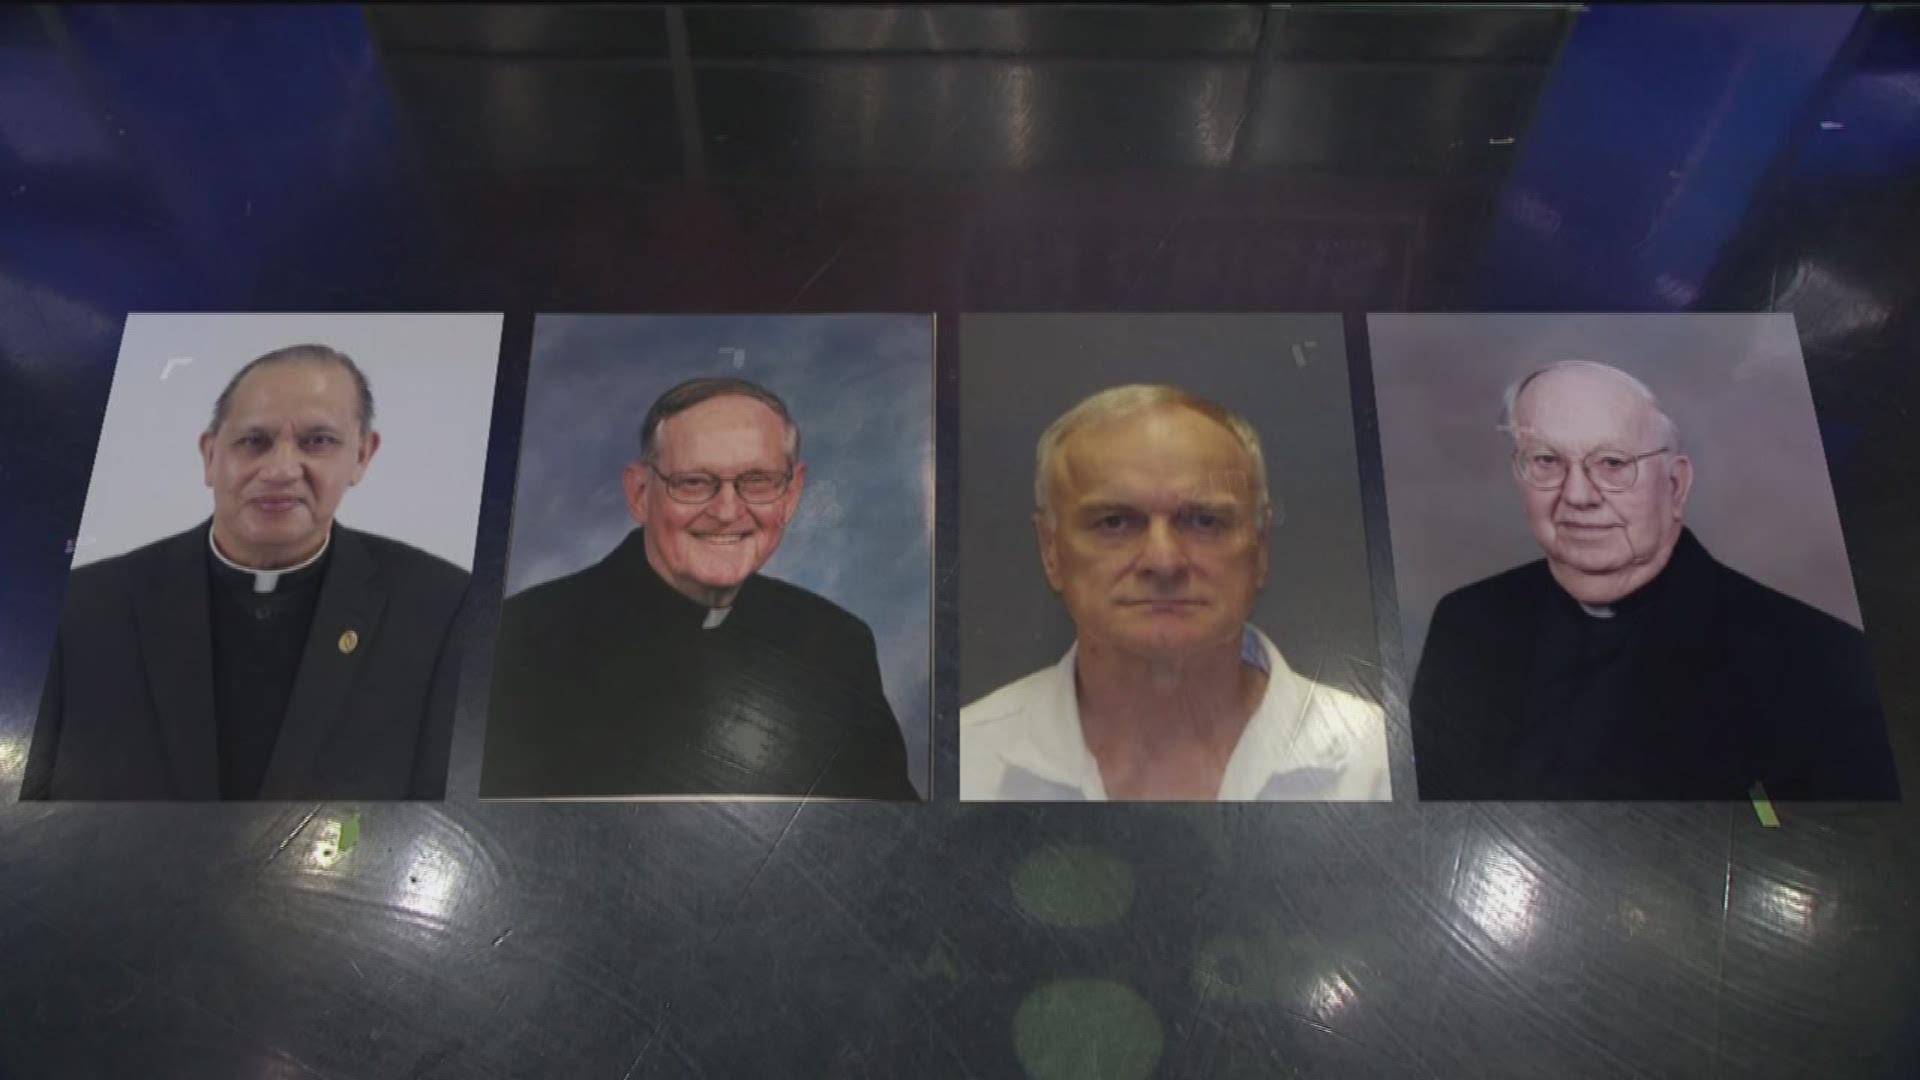 The Diocese released the names of 31 priests who are credibly accused of sex abuse.